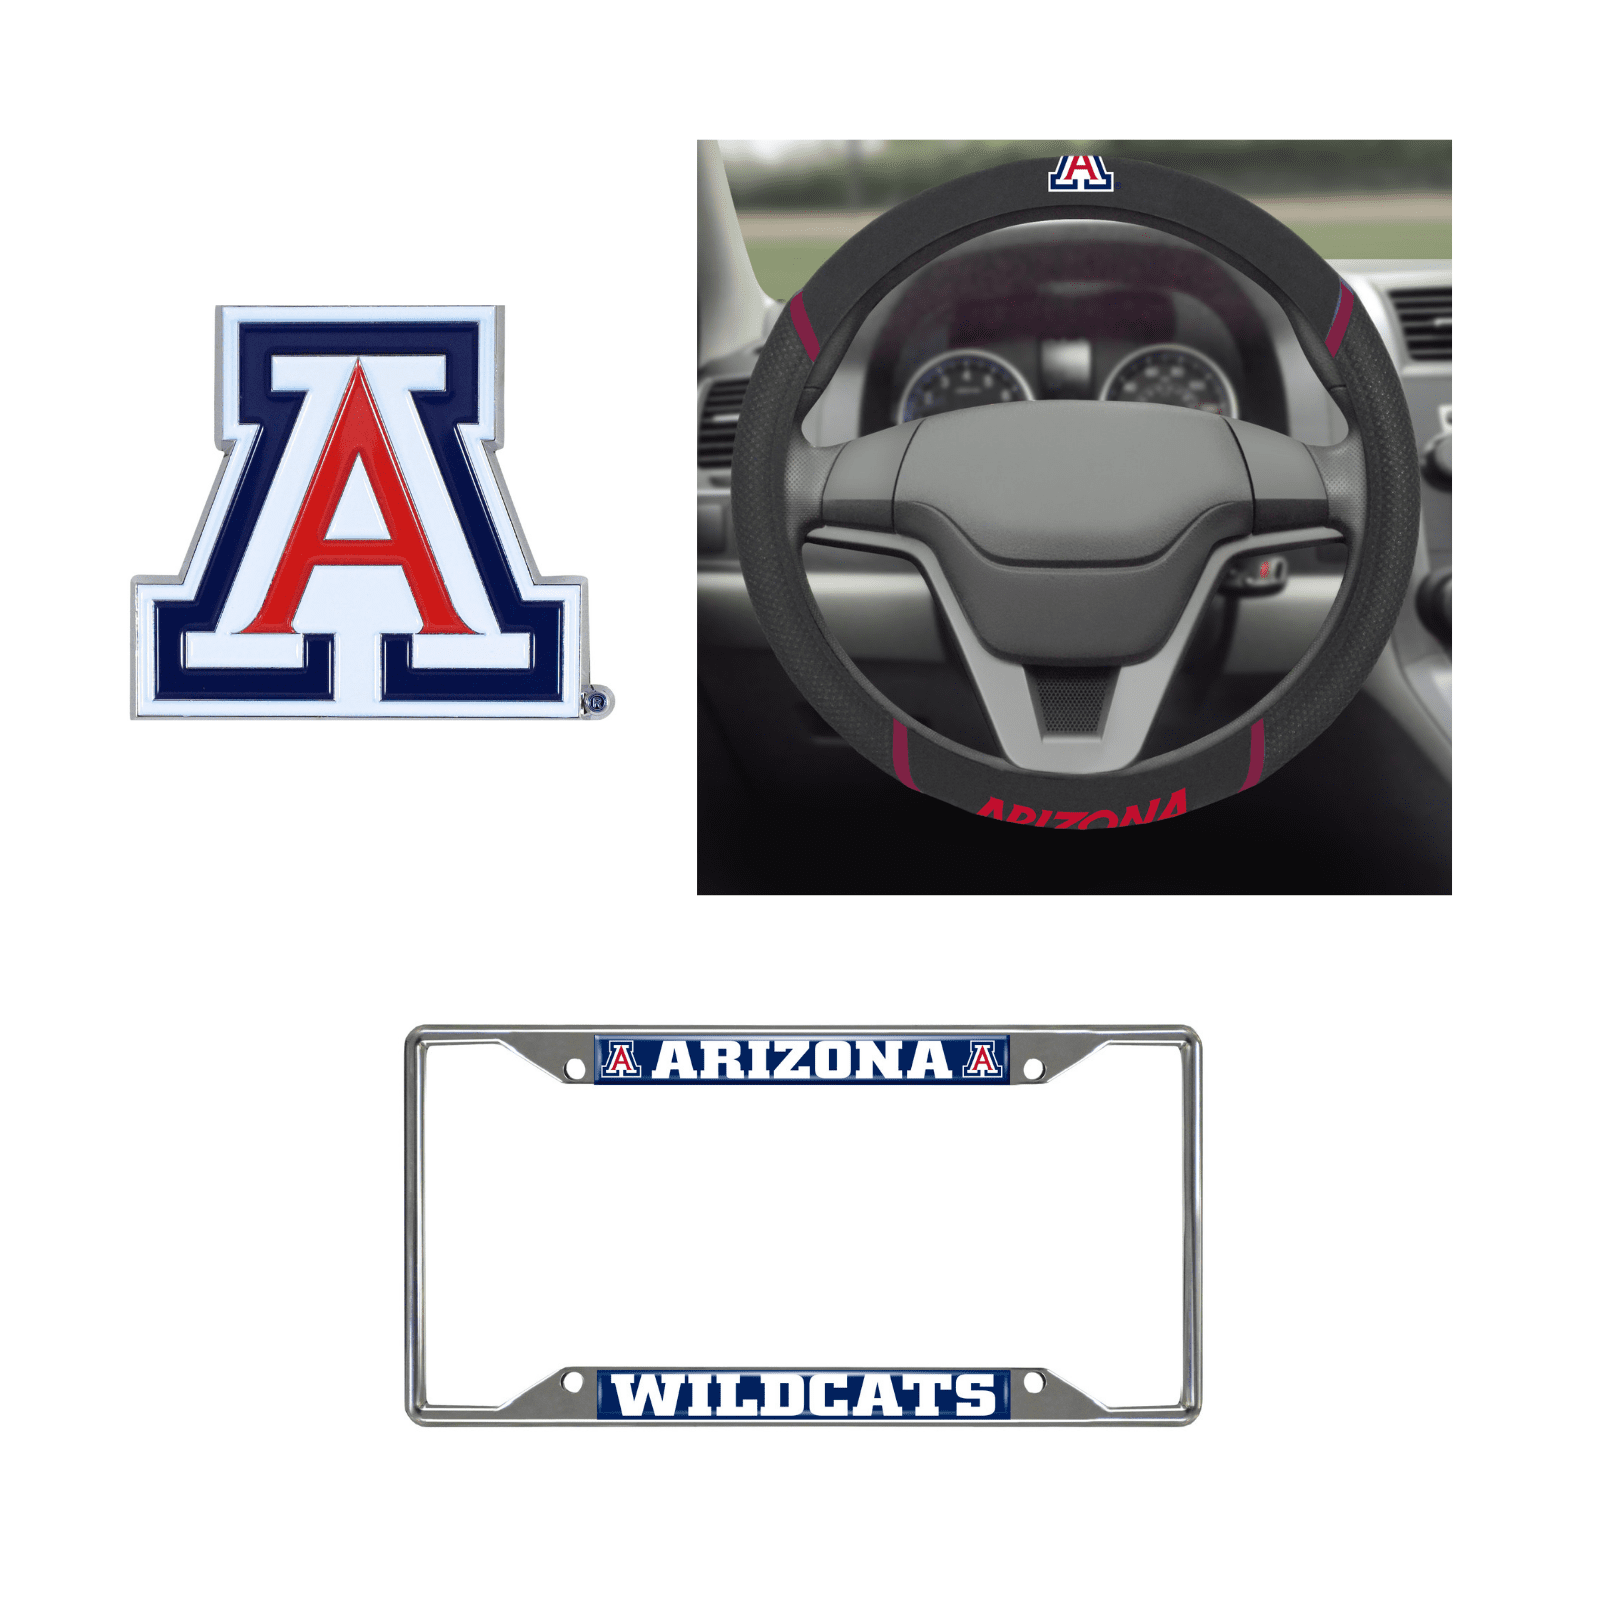 Arizona Wildcats Steering Wheel Cover, License Plate Frame, 3D Color Emblem